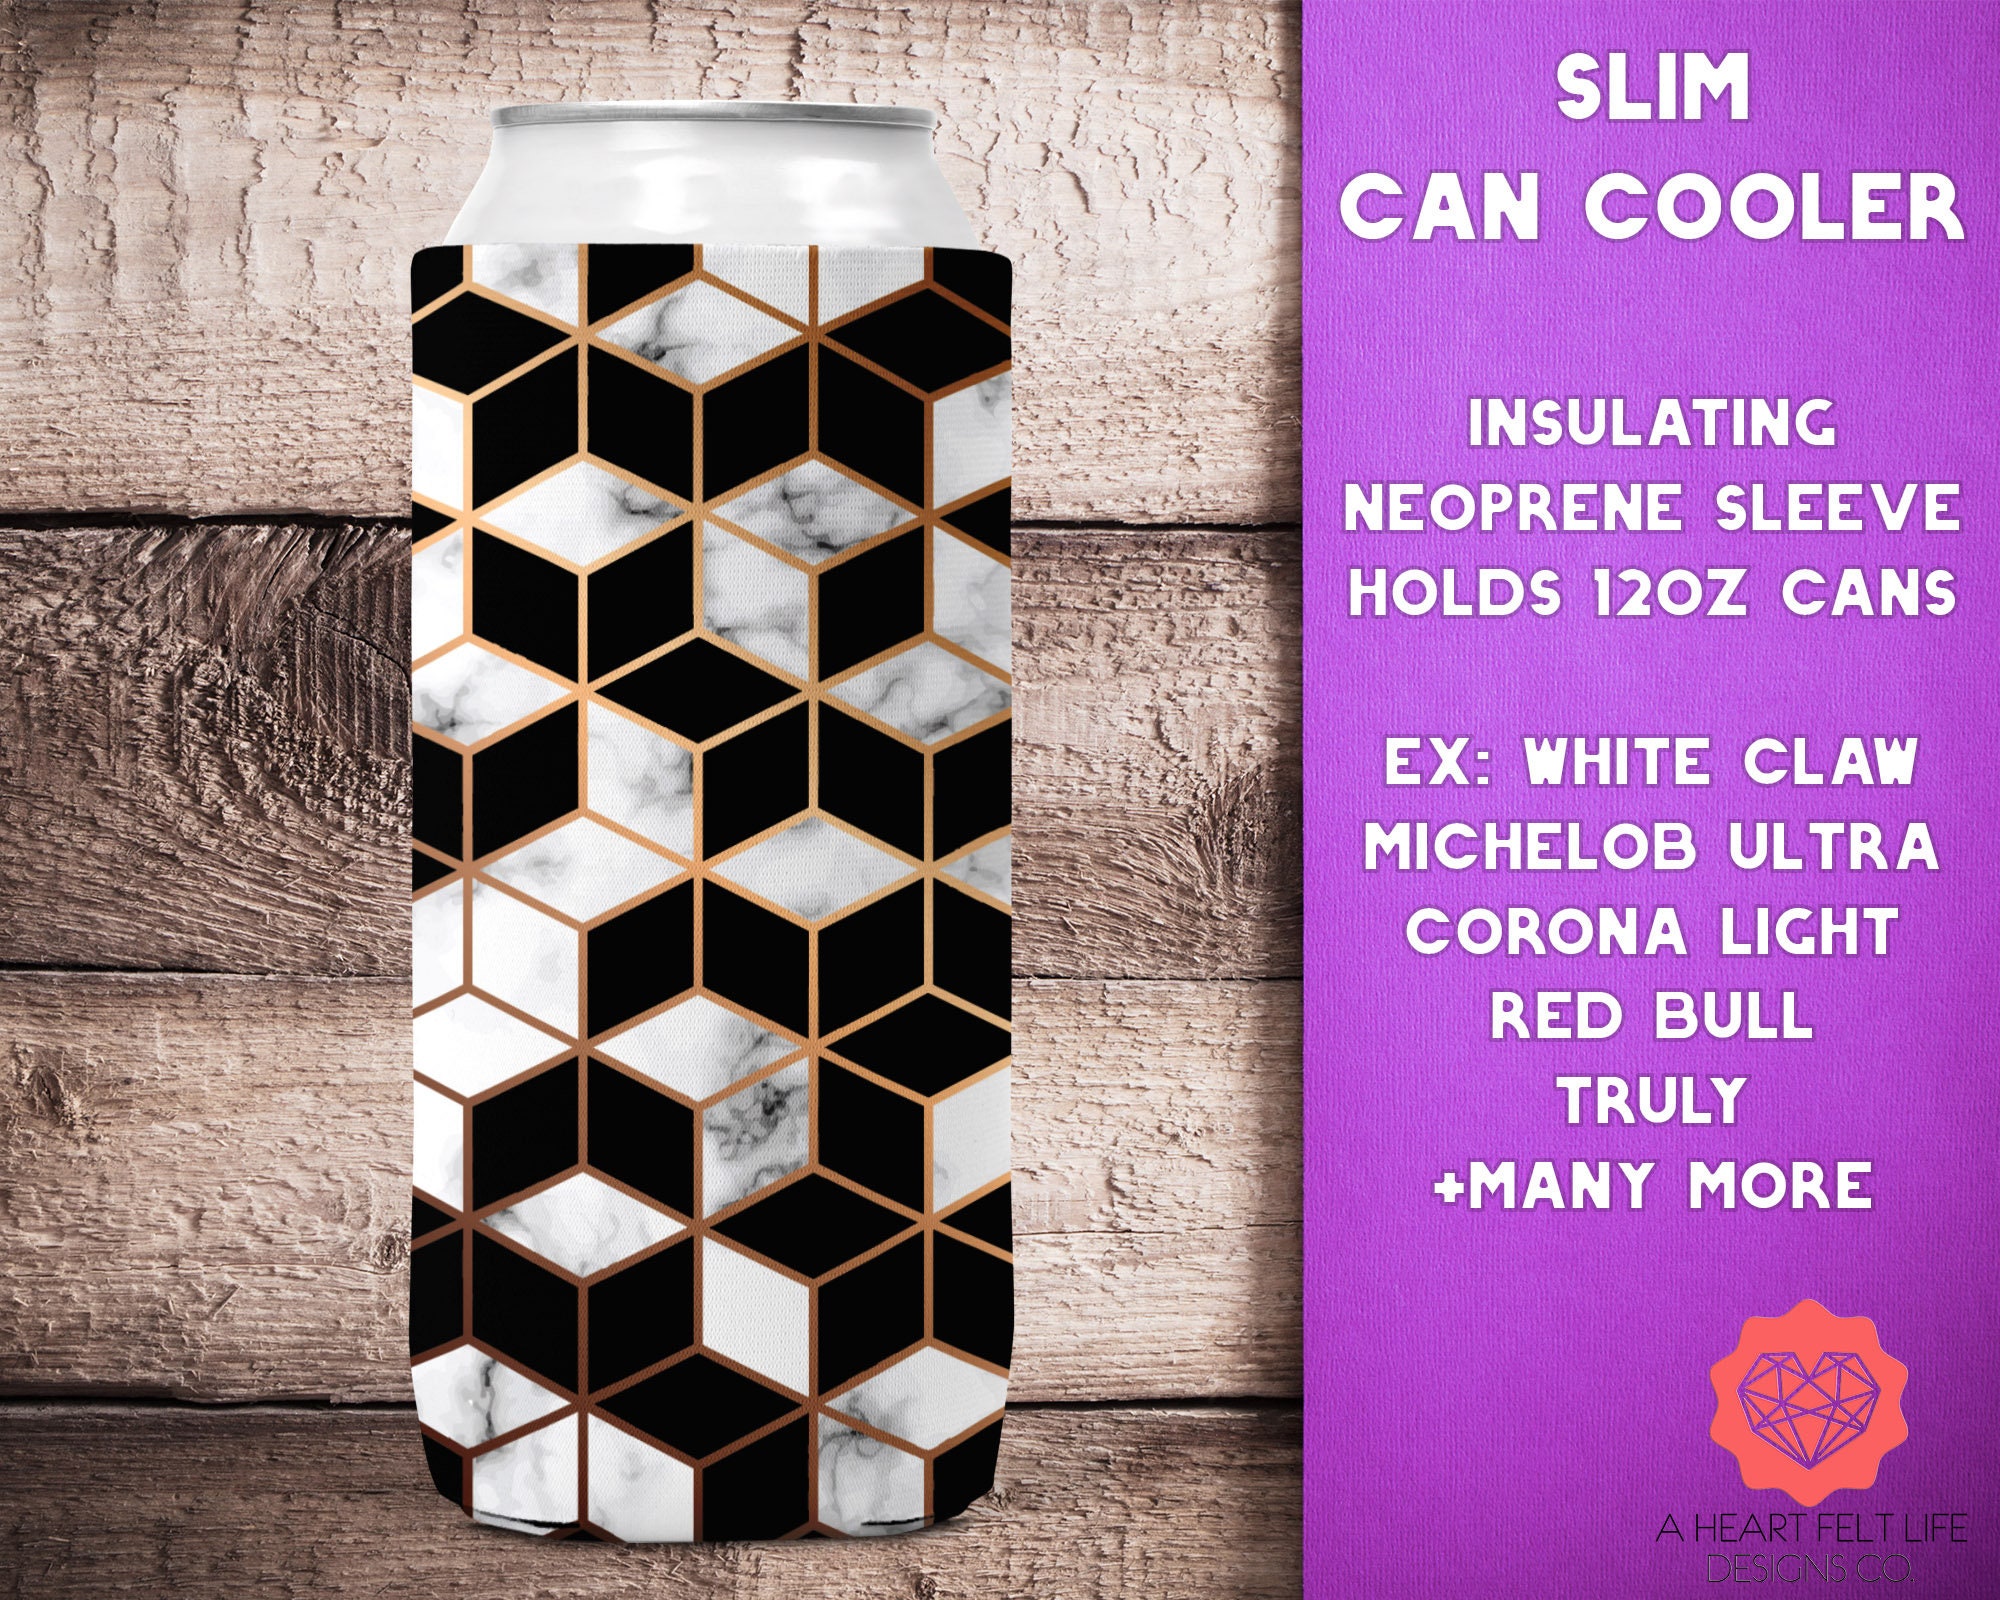 Koozie White Claw Can Holder Insulated Neoprene Cooler for Slim